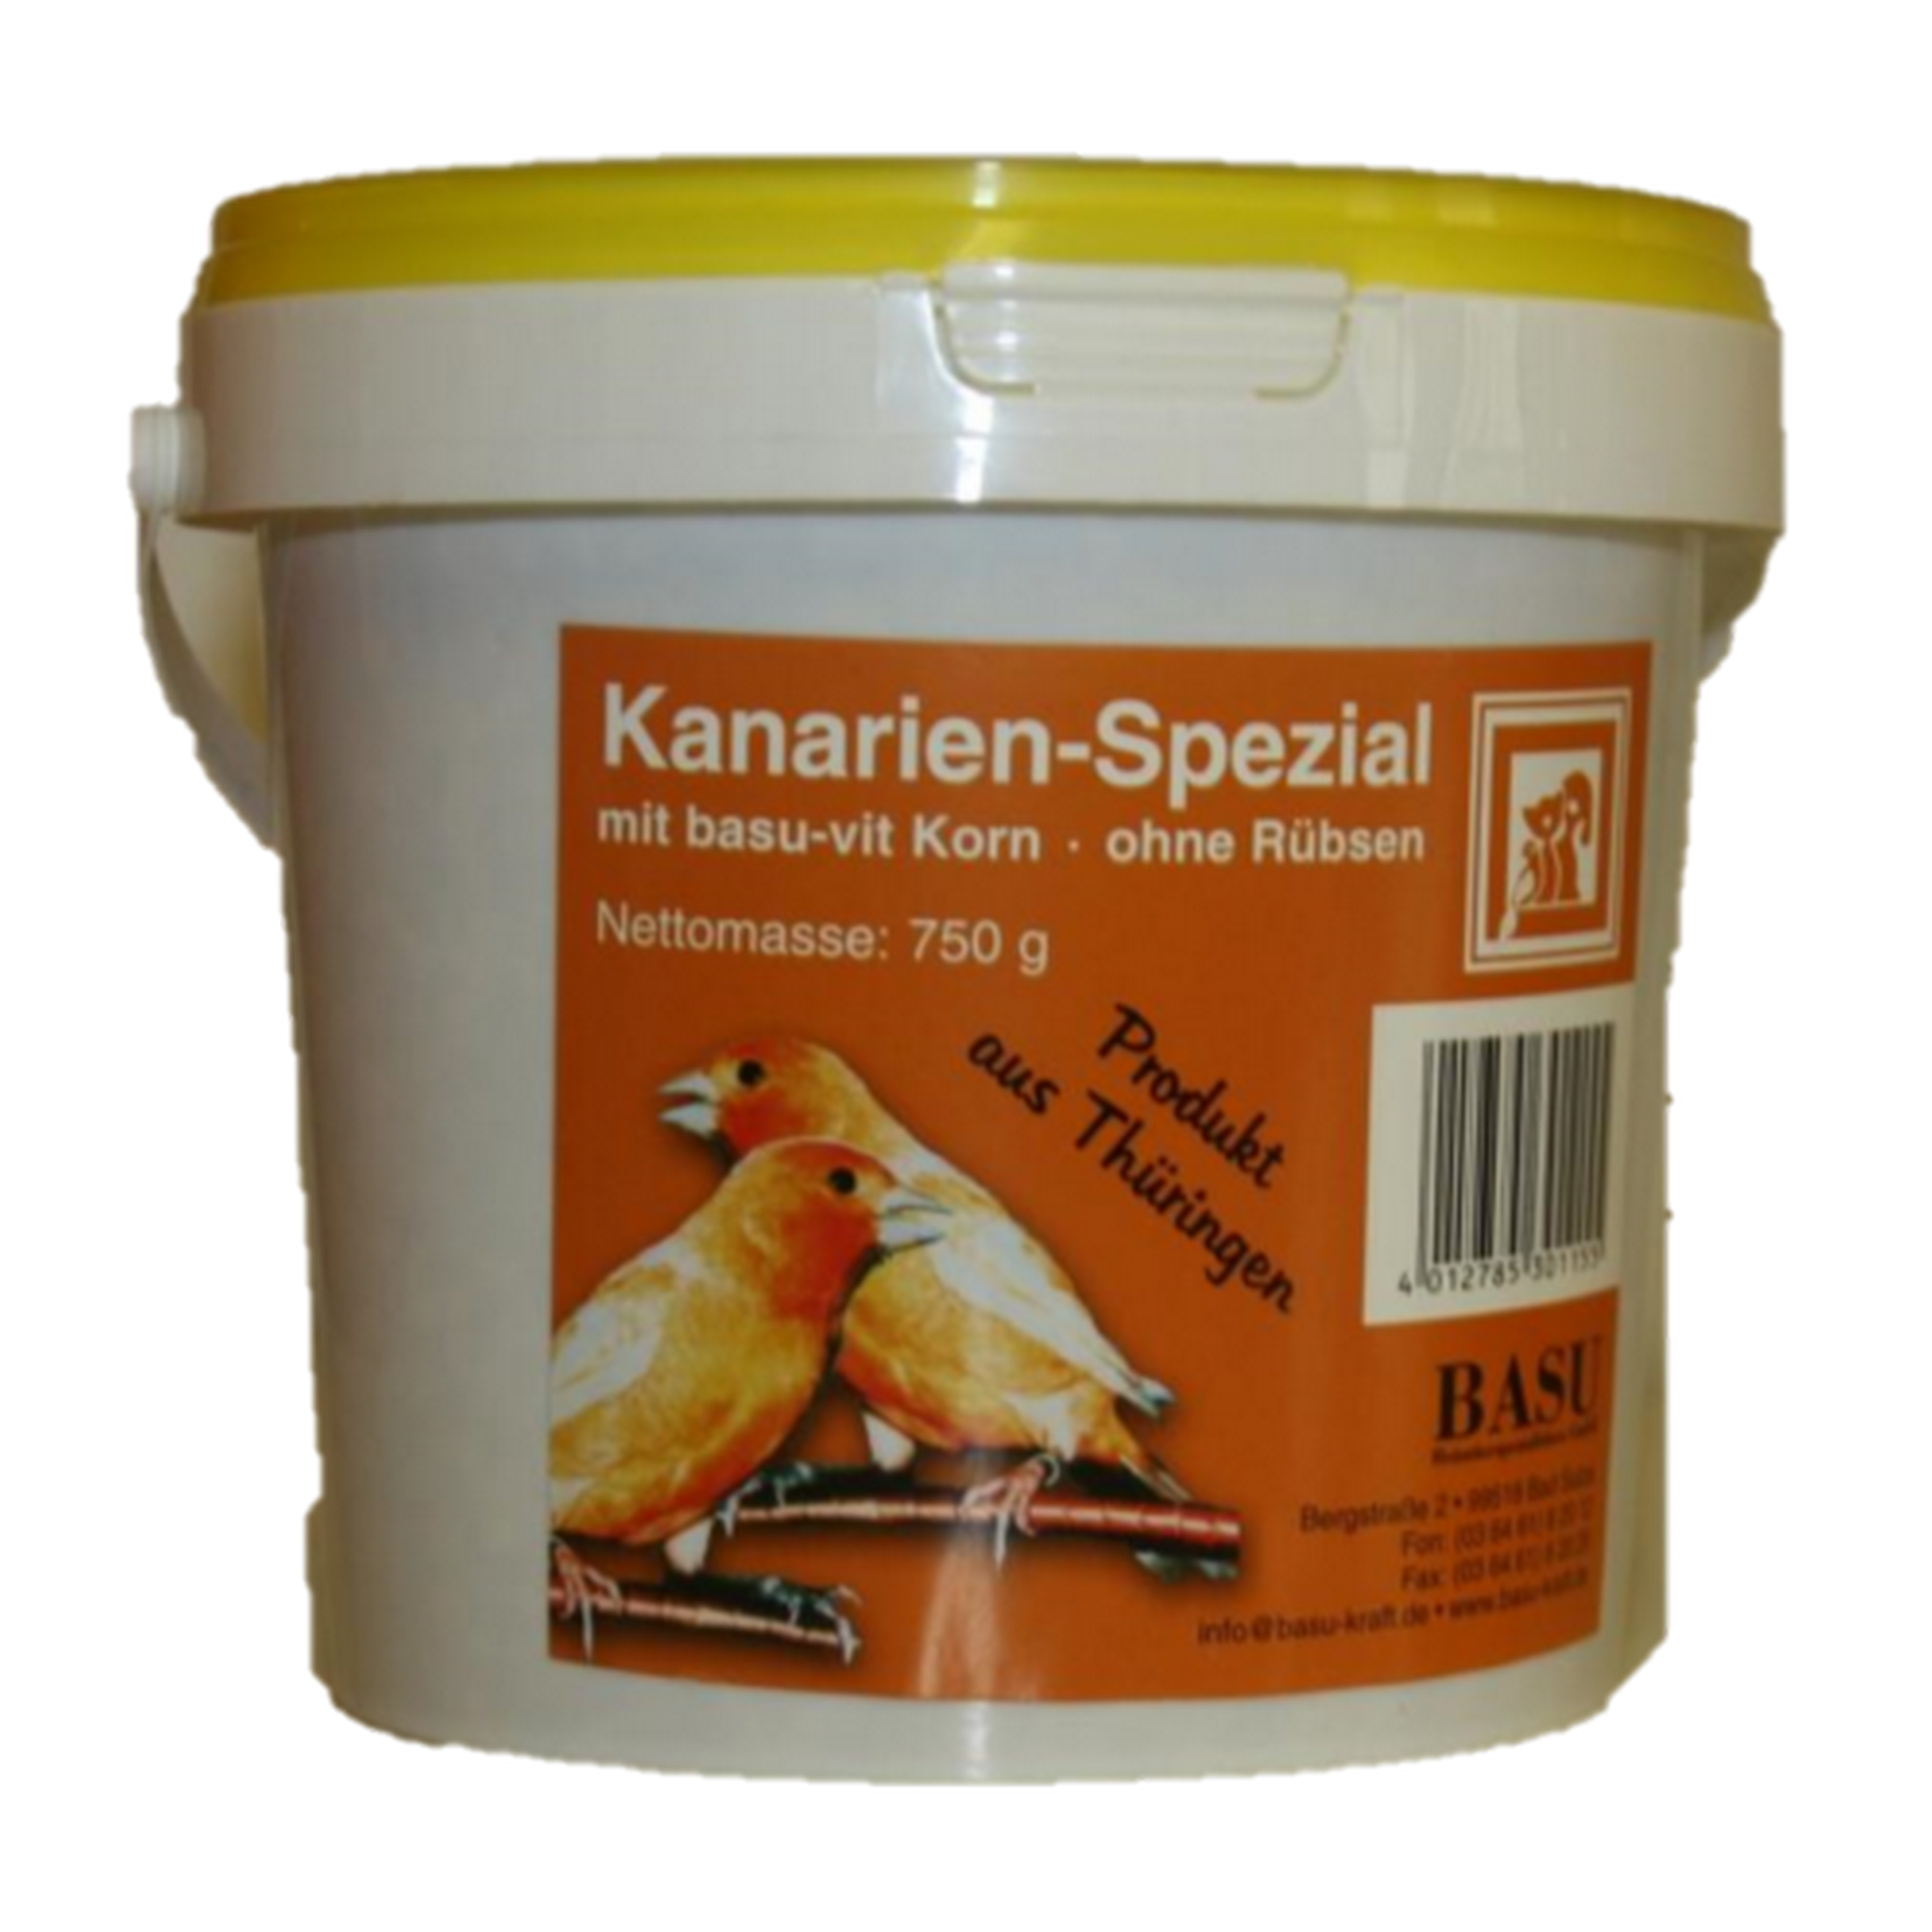 Kanarienfutter Spezial 750 g + product picture